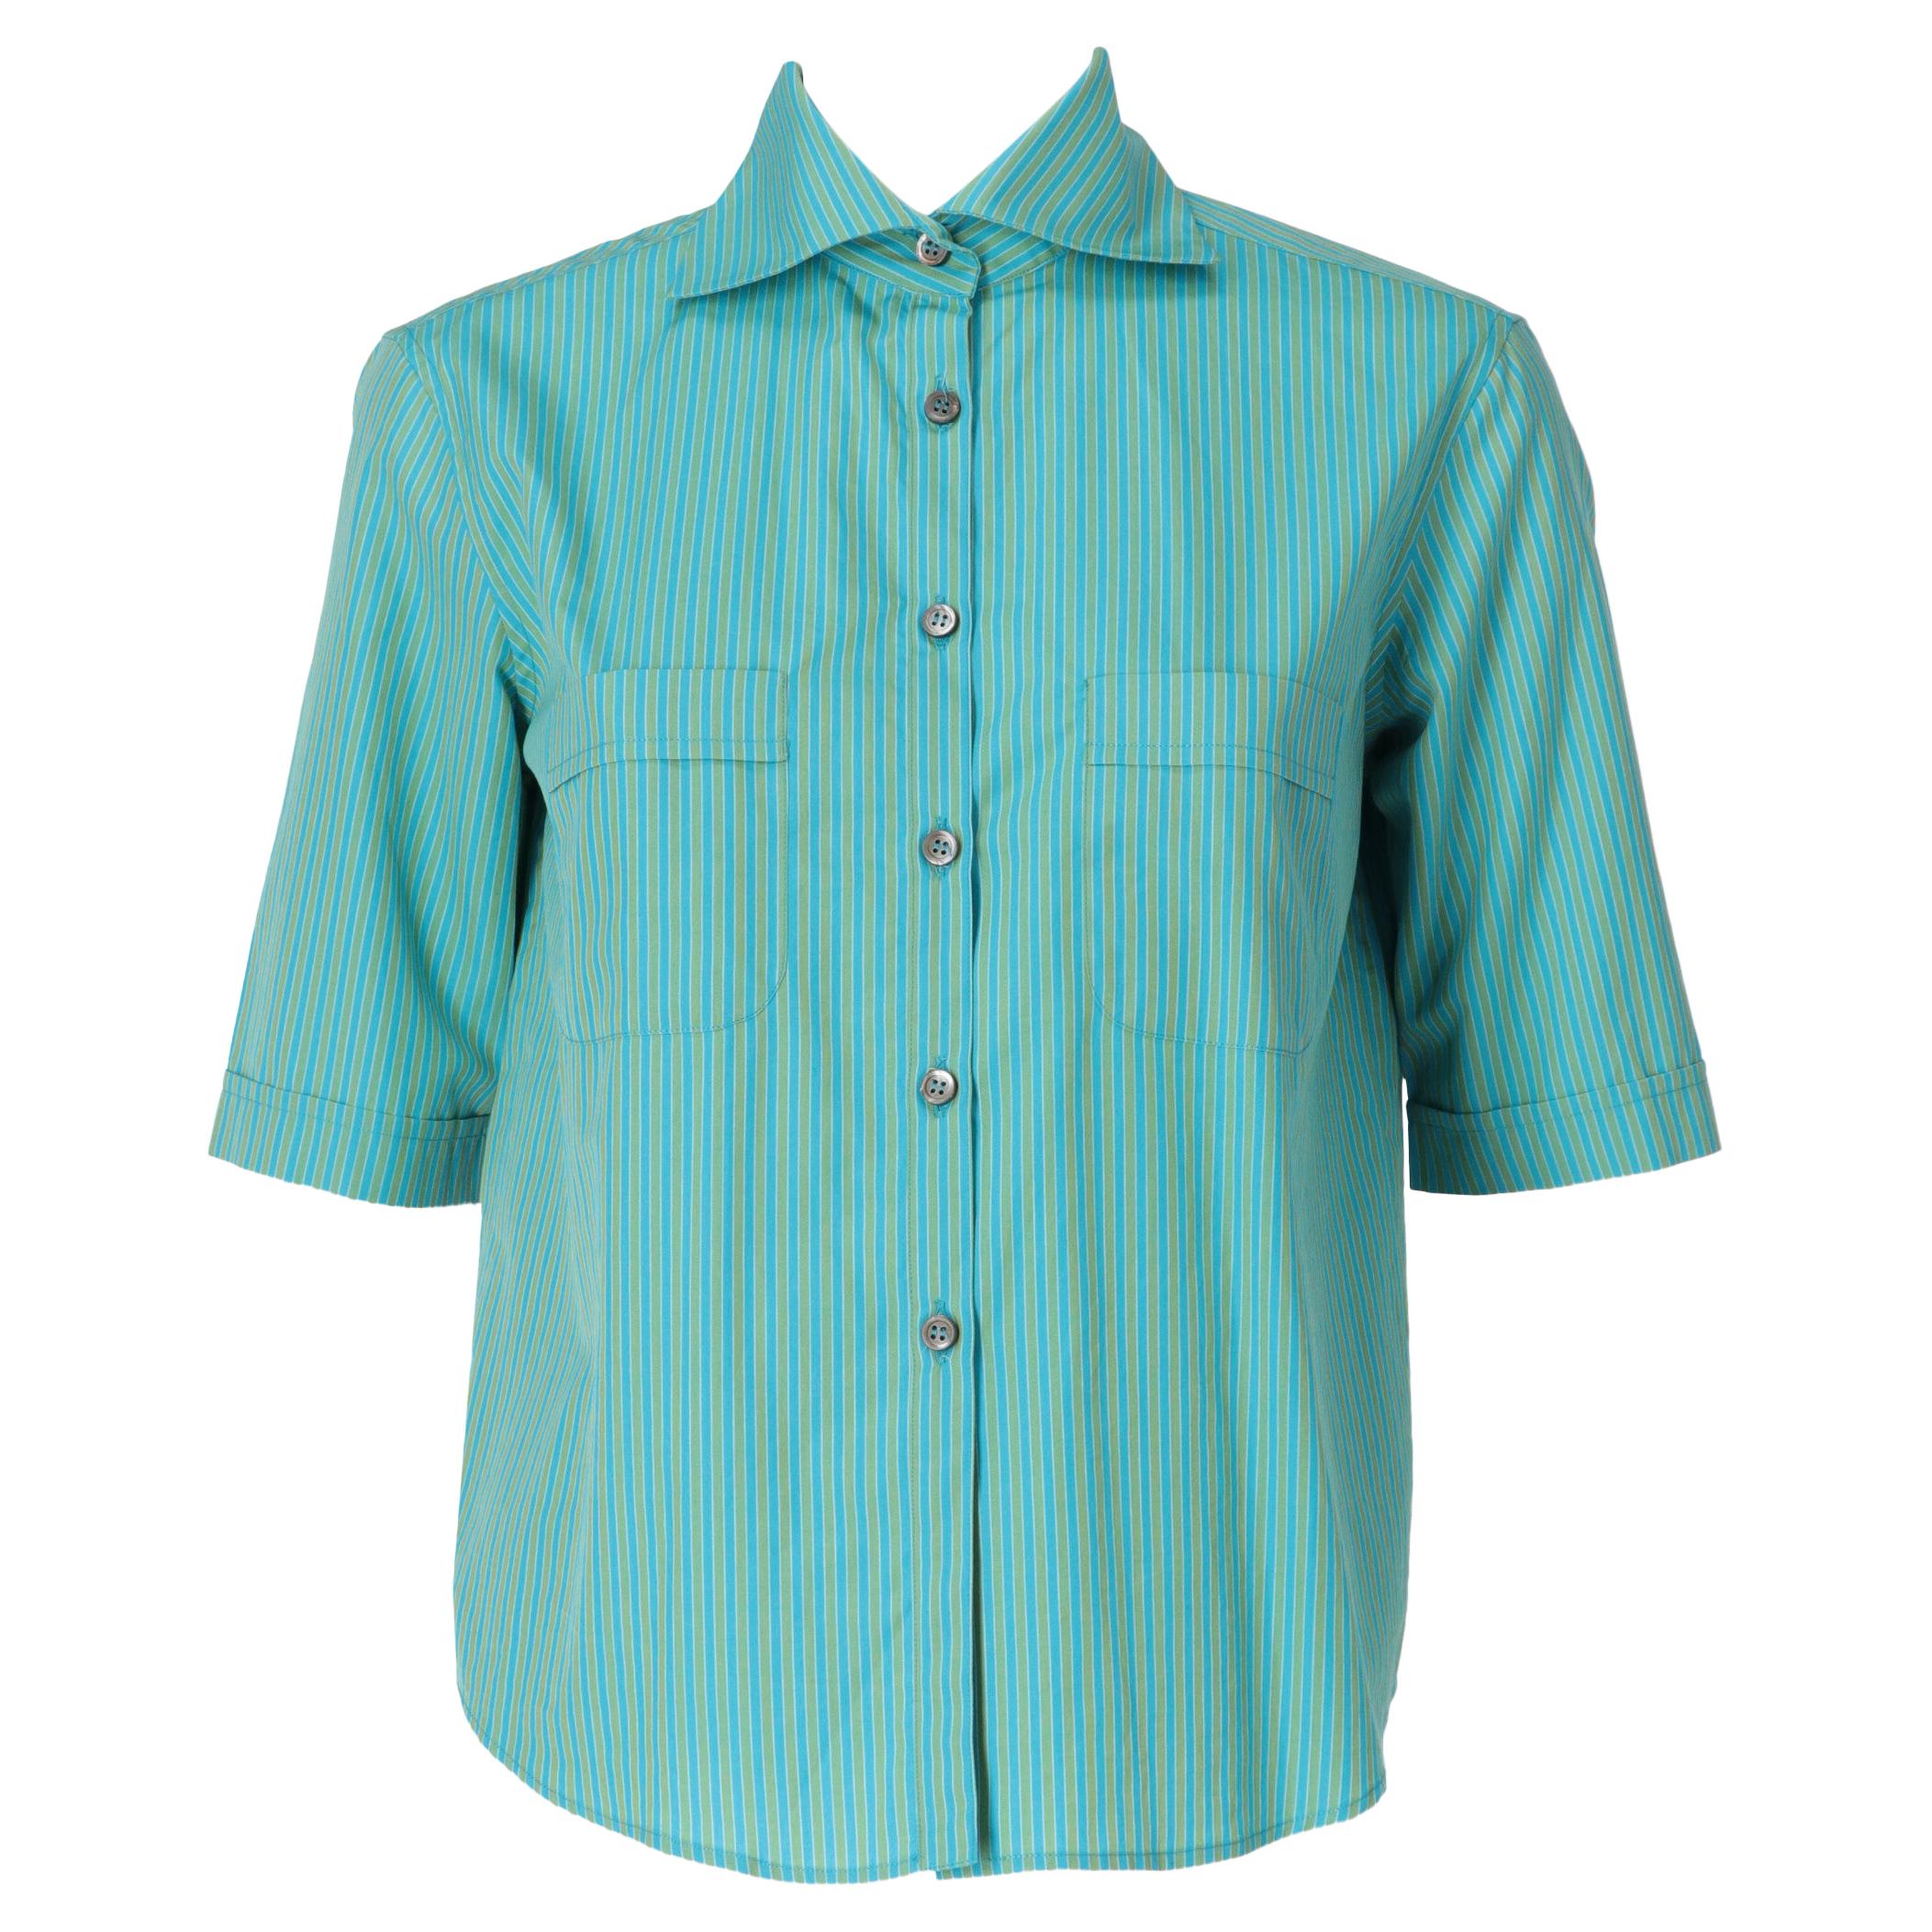 1990s Romeo Gigli light blue and green striped cotton shirt For Sale